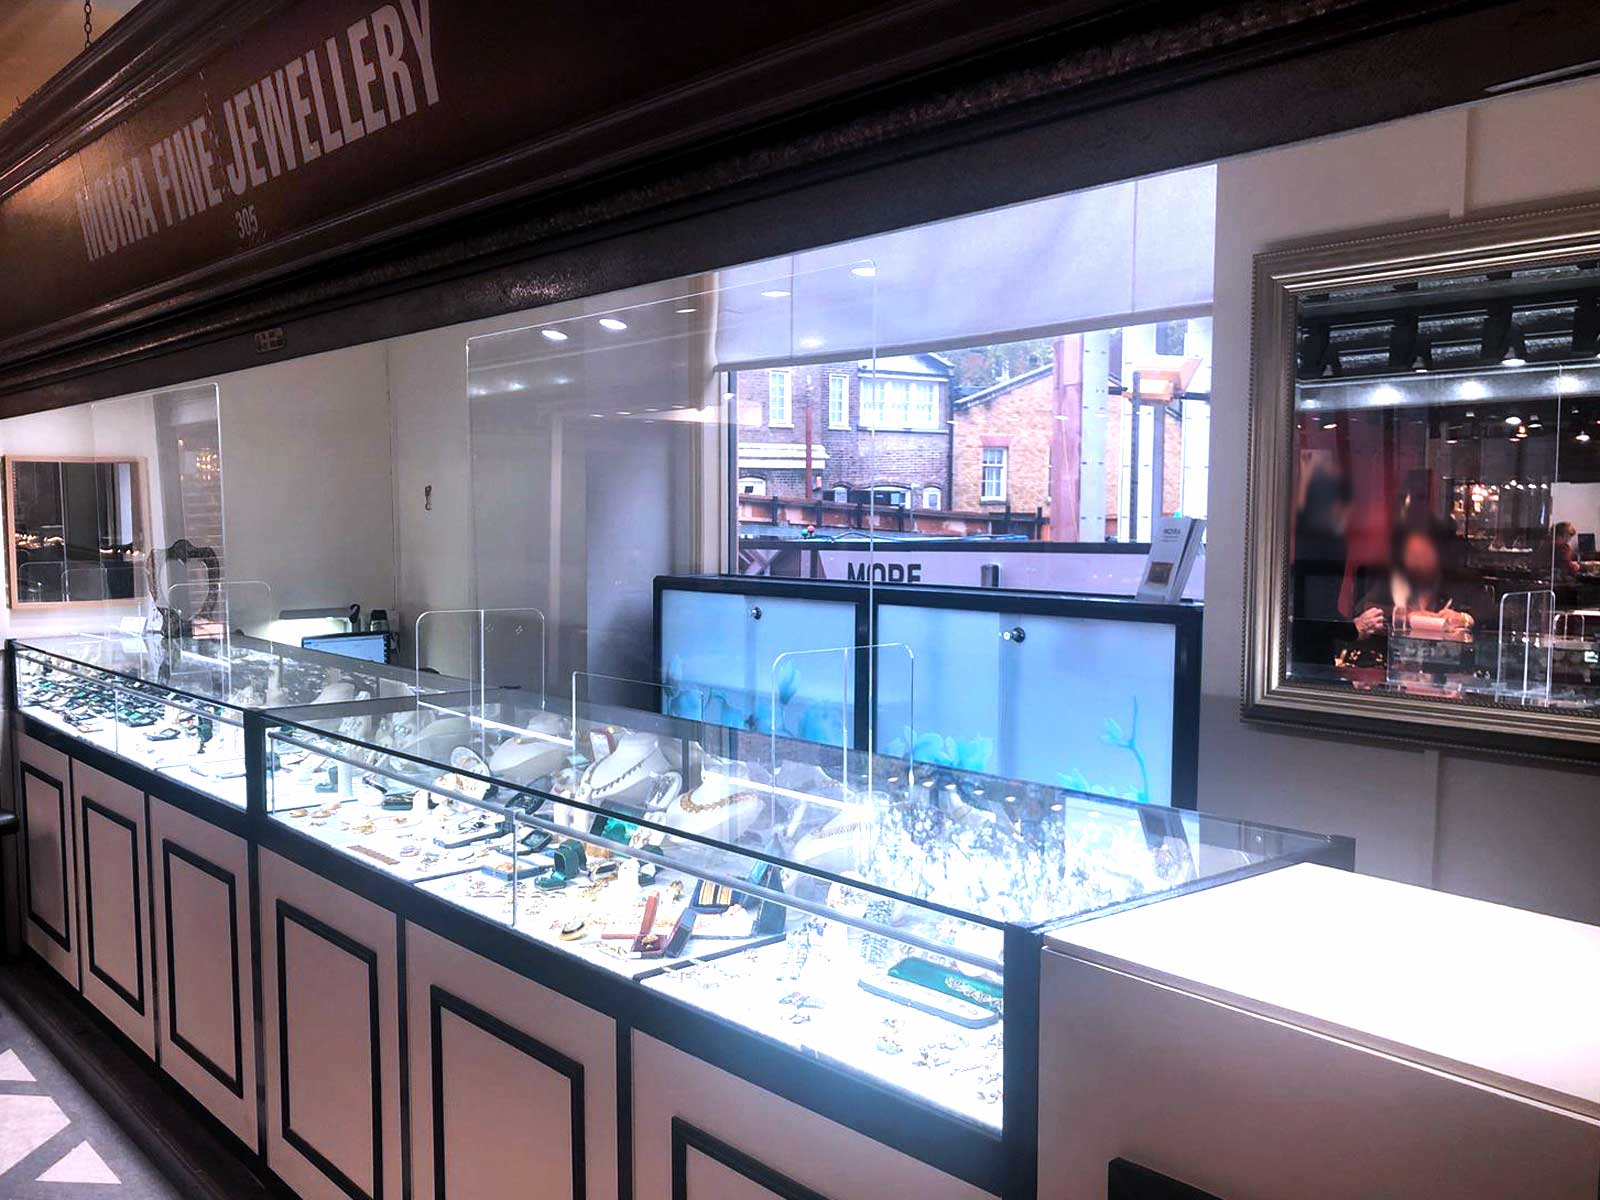 Moira Fine Jewellery at Grays Antiques Center, London